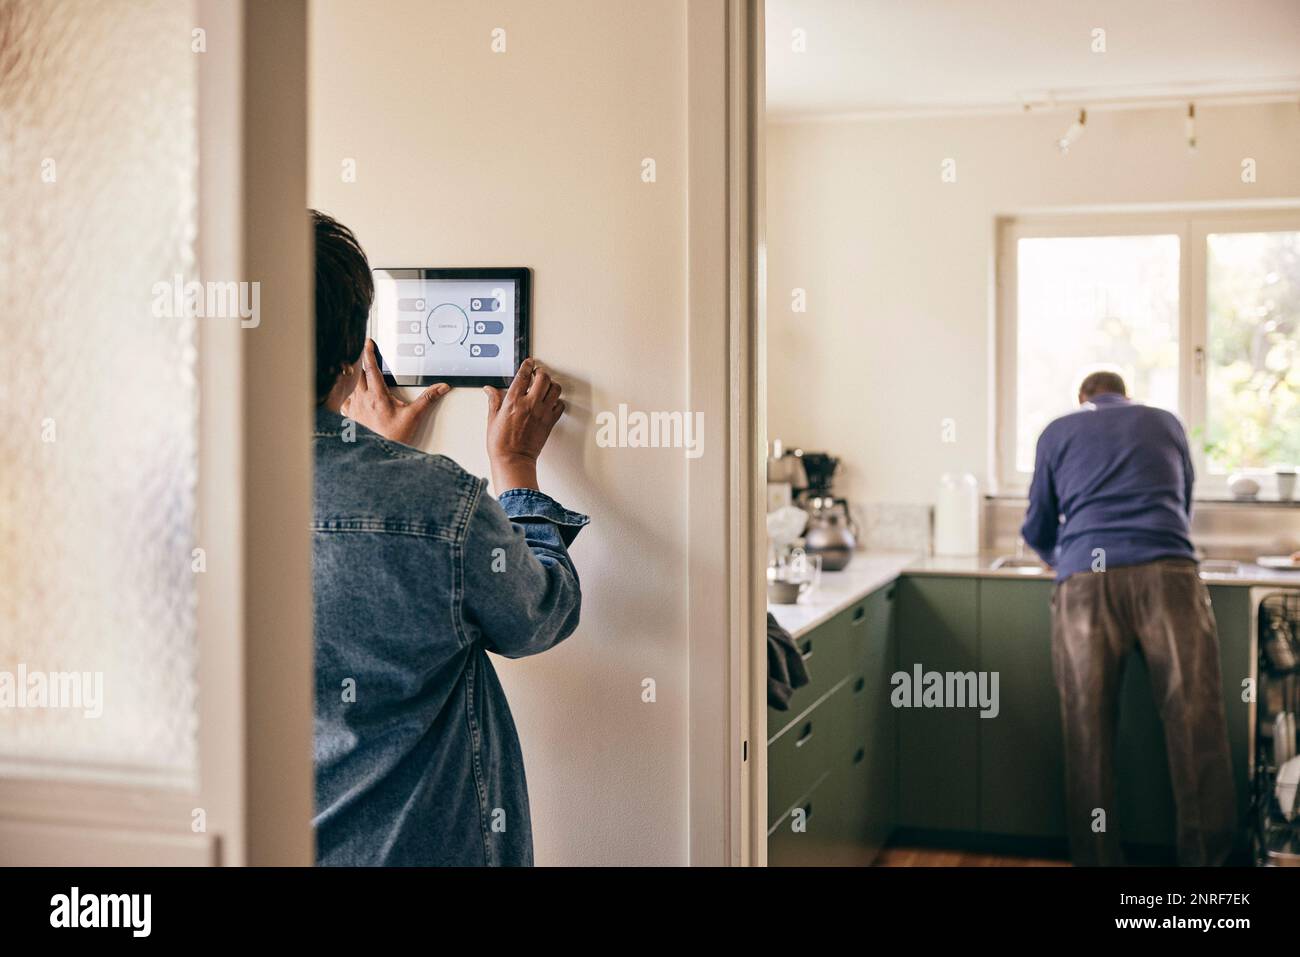 Rear view of woman using digital tablet mounted on wall at home Stock Photo